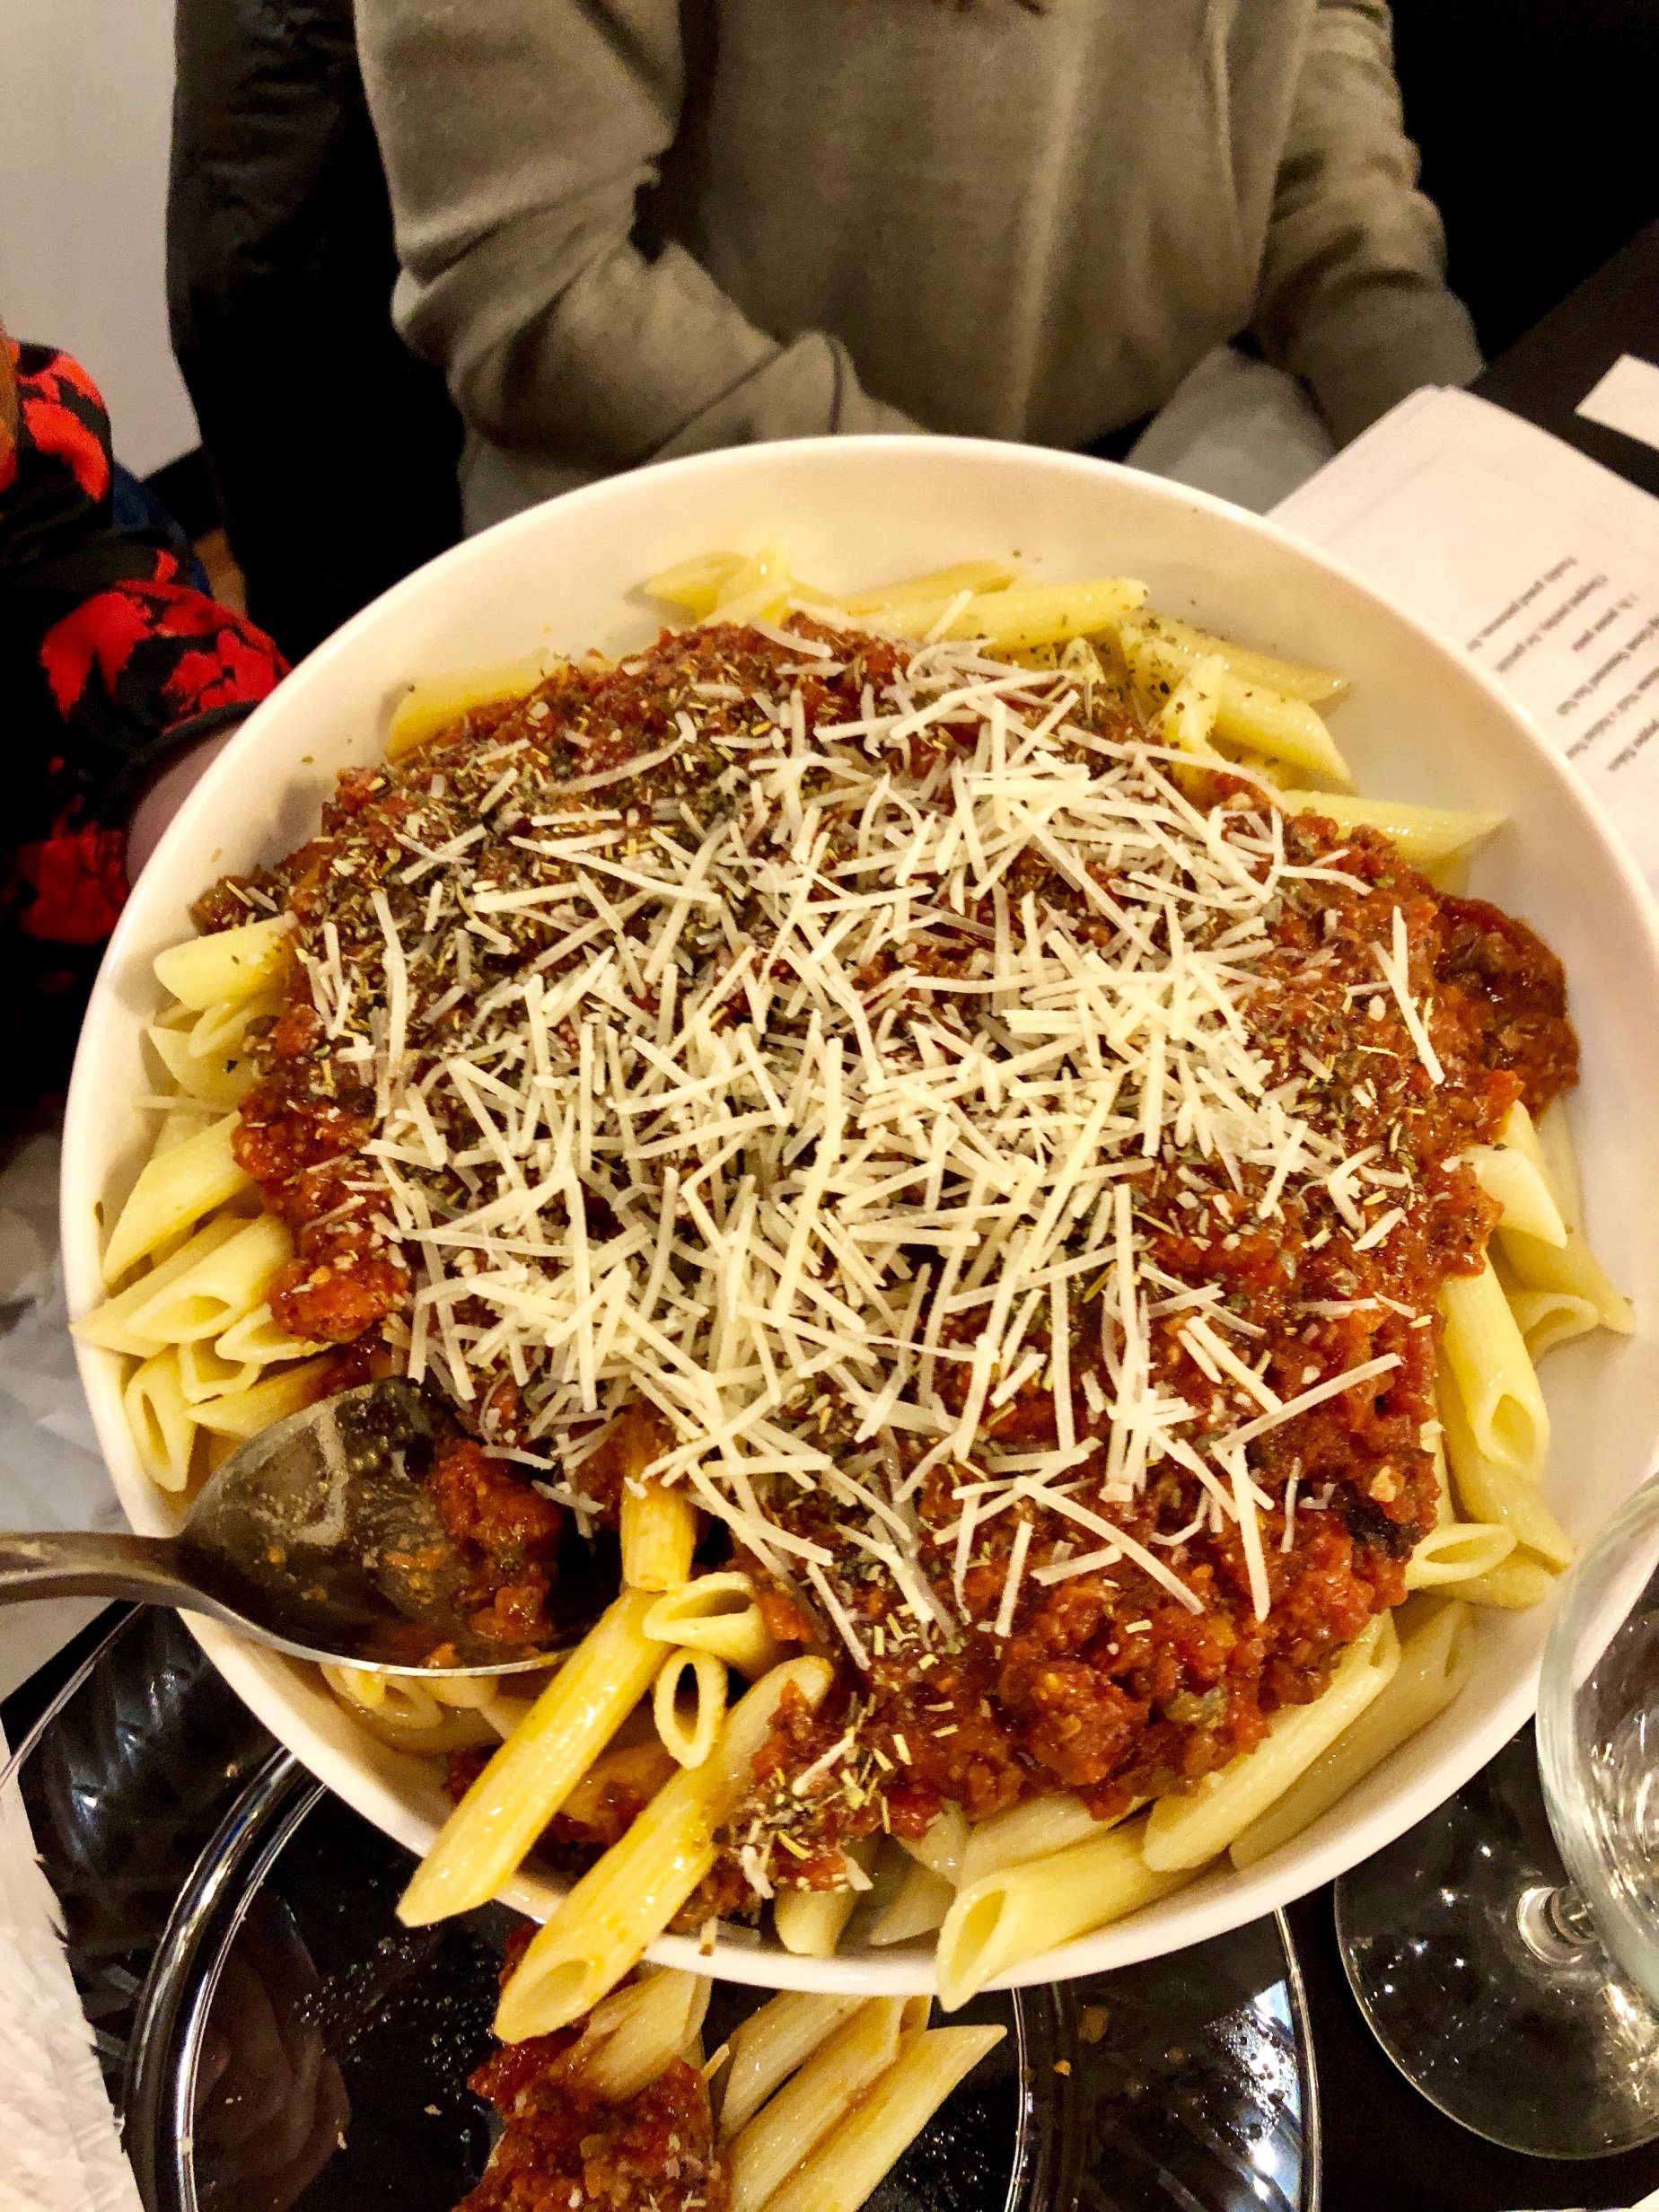 Image: A large, round, white bowl of pasta puttanesca with a silver serving spoon. The penne pasta is plain, and the red sauce sits on top. On top of the sauce are silvers of grated parmesan cheese. Photo by Rebecca Wells. 